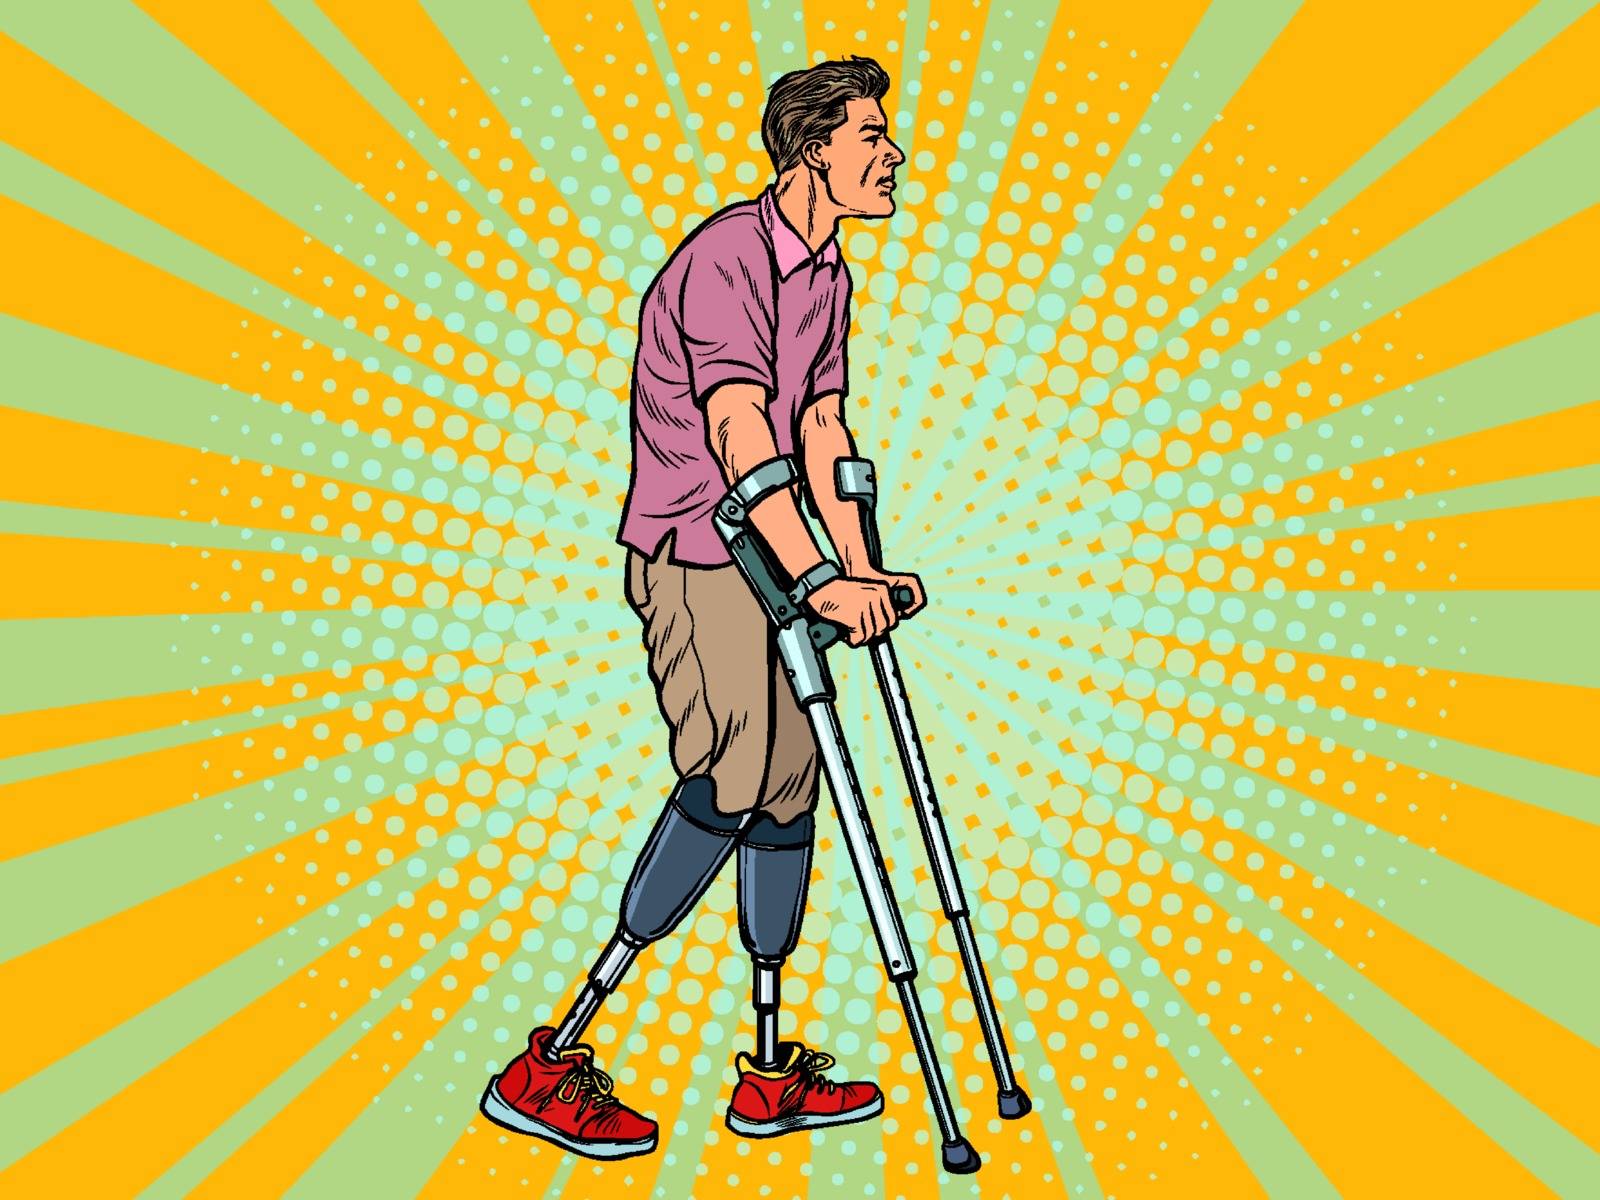 legless veteran with a bionic prosthesis with crutches. a disabled man learns to walk after an injury. rehabilitation treatment and recovery. pop art retro vector illustration kitsch vintage drawing 50s 60s